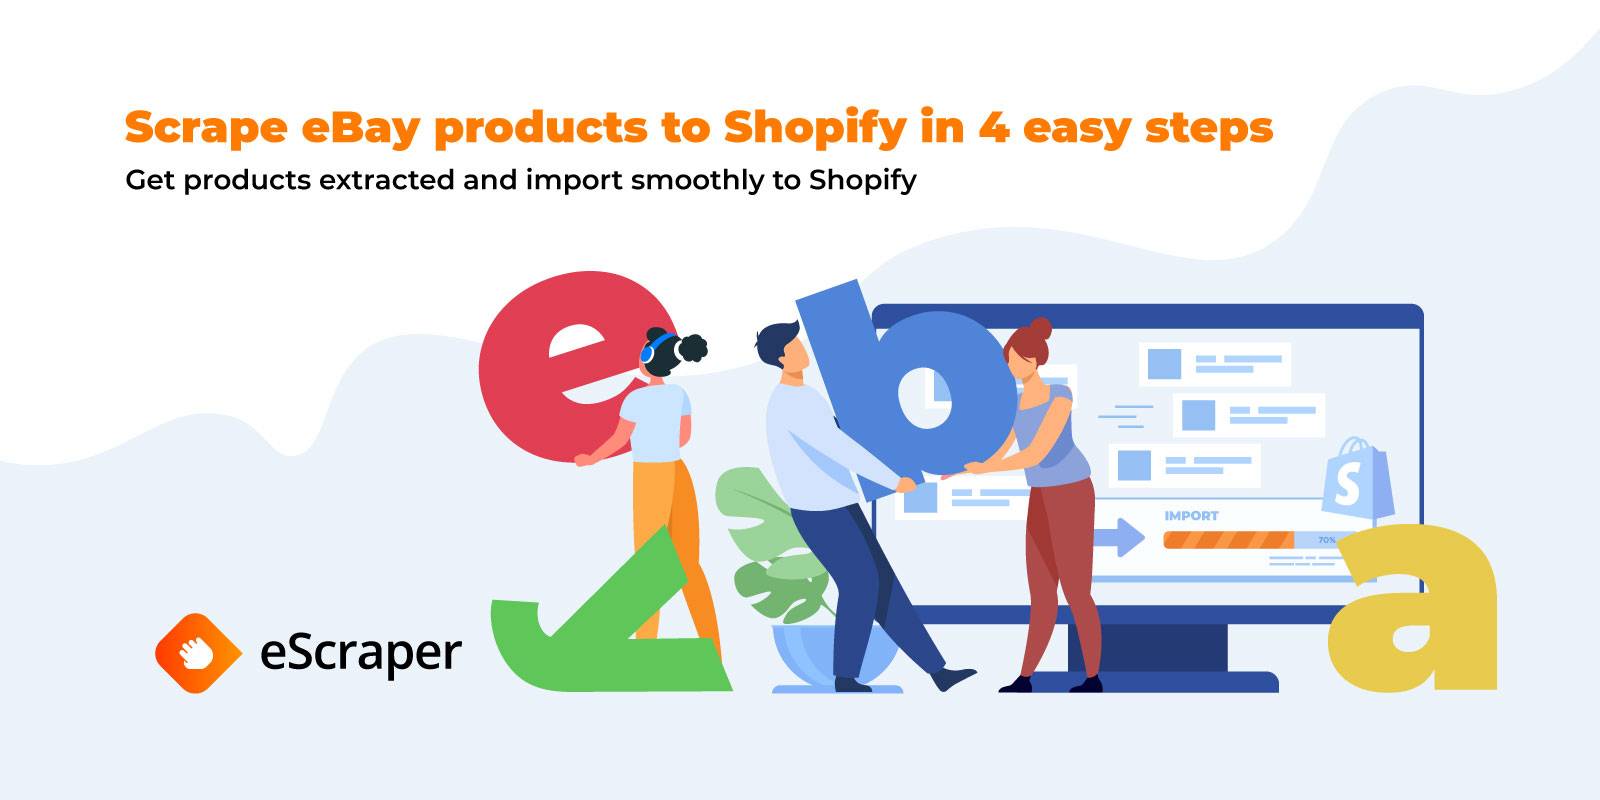 Scrape eBay products to Shopify in 4 easy steps